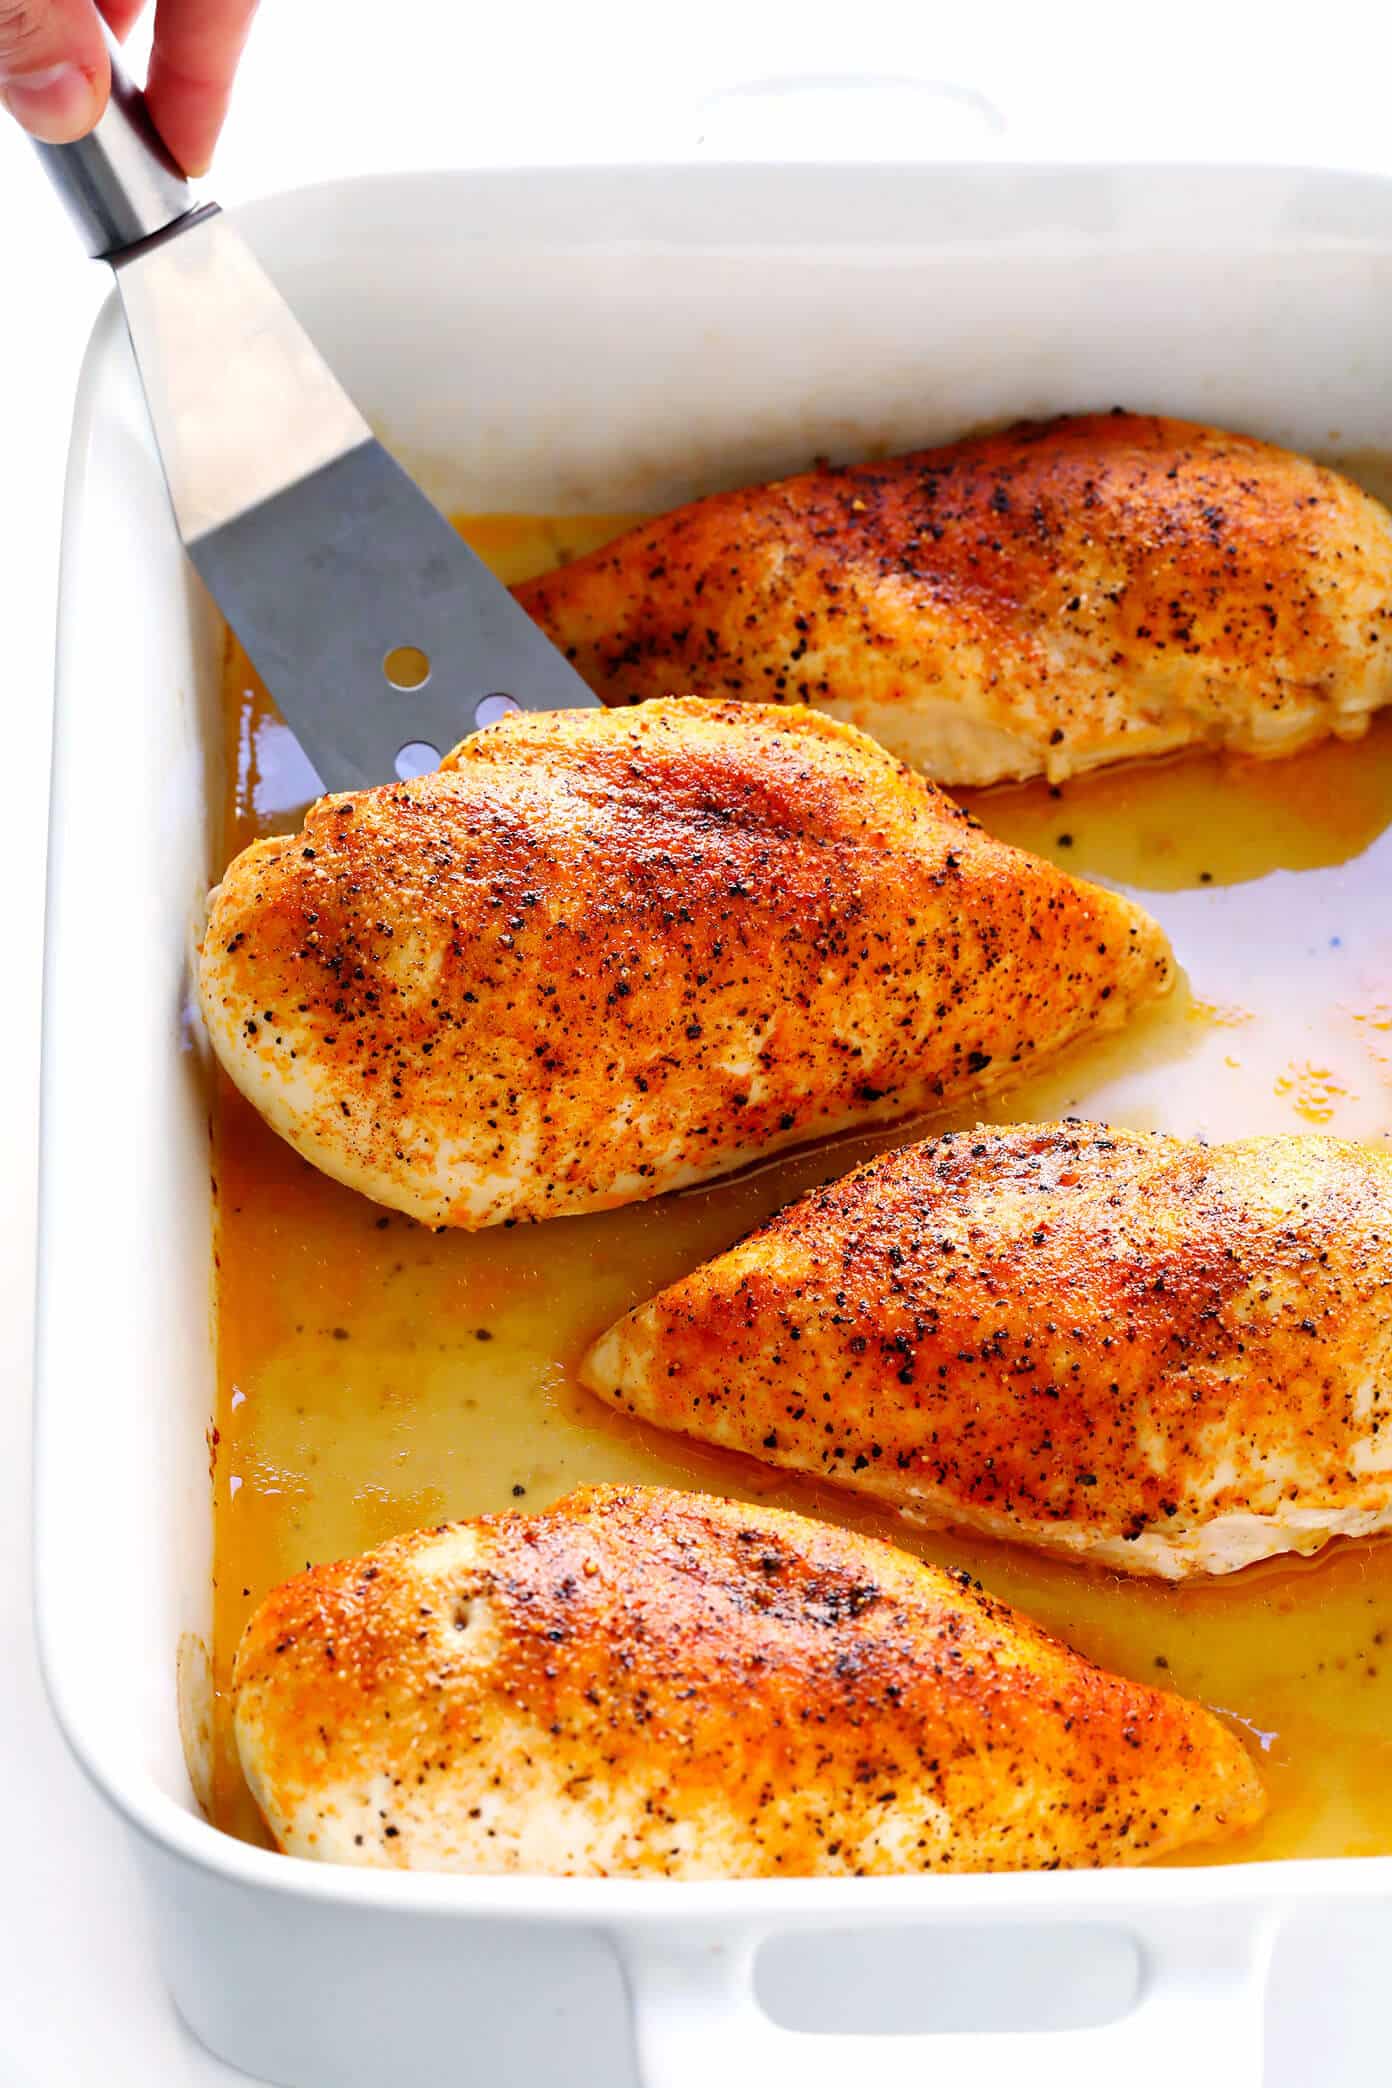 How Long to Cook Chicken Breast in the Oven